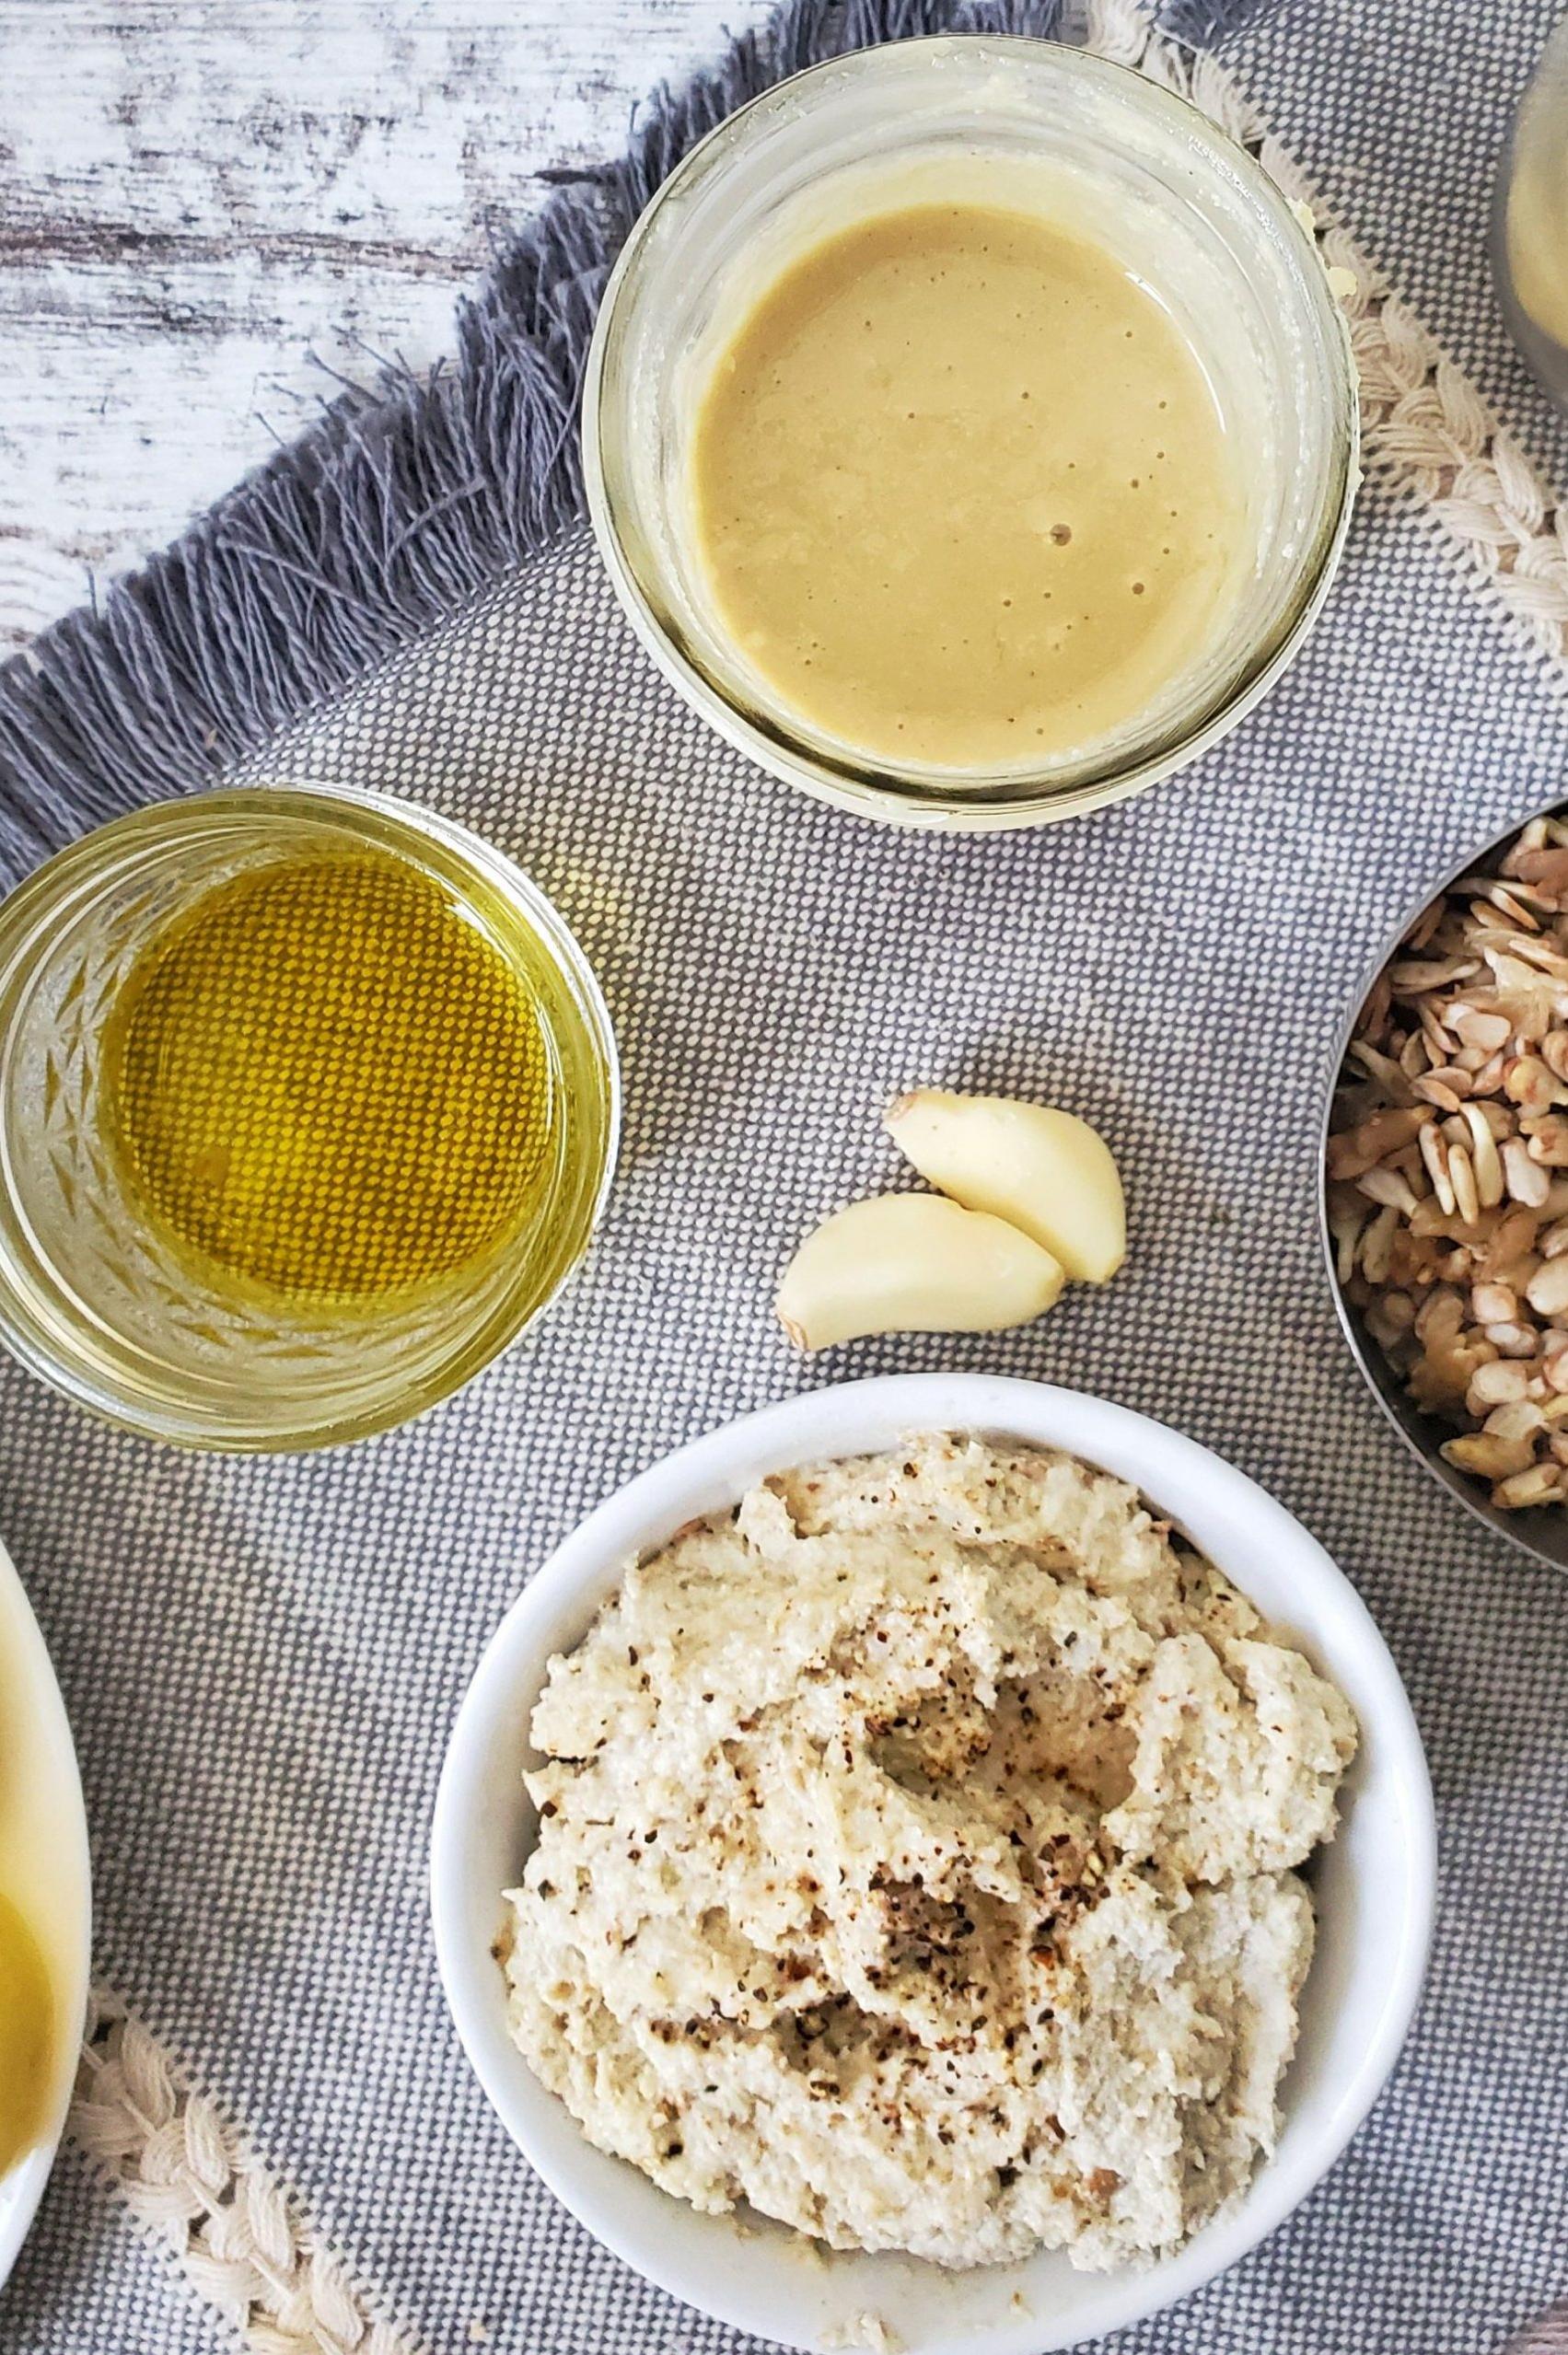  This Sprouted Sunflower Seed Hummus recipe is the ultimate healthy treat to add to your snack rotation!